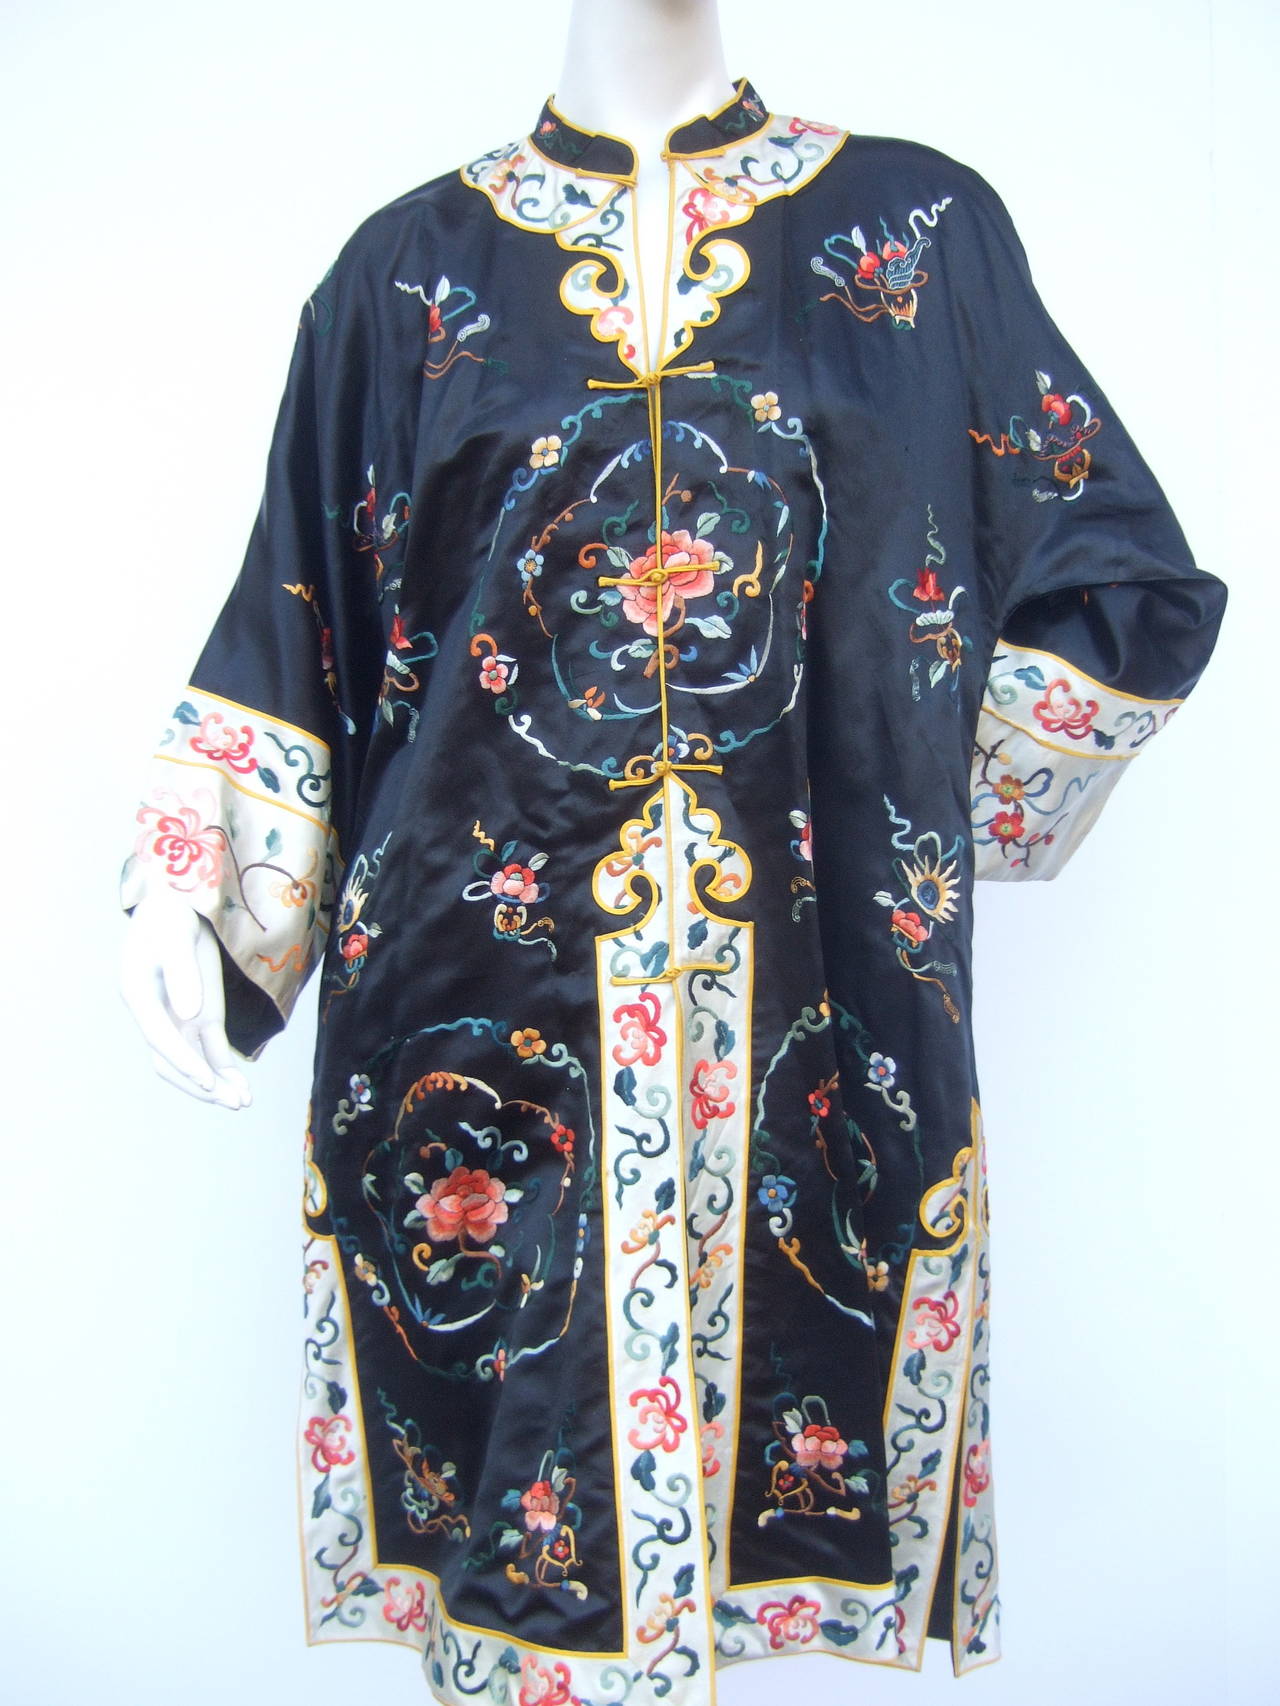 Exotic Chinoiserie embroidered satin duster coat  1980s
The luxurious black satin duster coat is embellished 
with elaborate floral embroidery throughout

The collar, cuffs, lower front opening, hemline and
sides are designed with contrasting